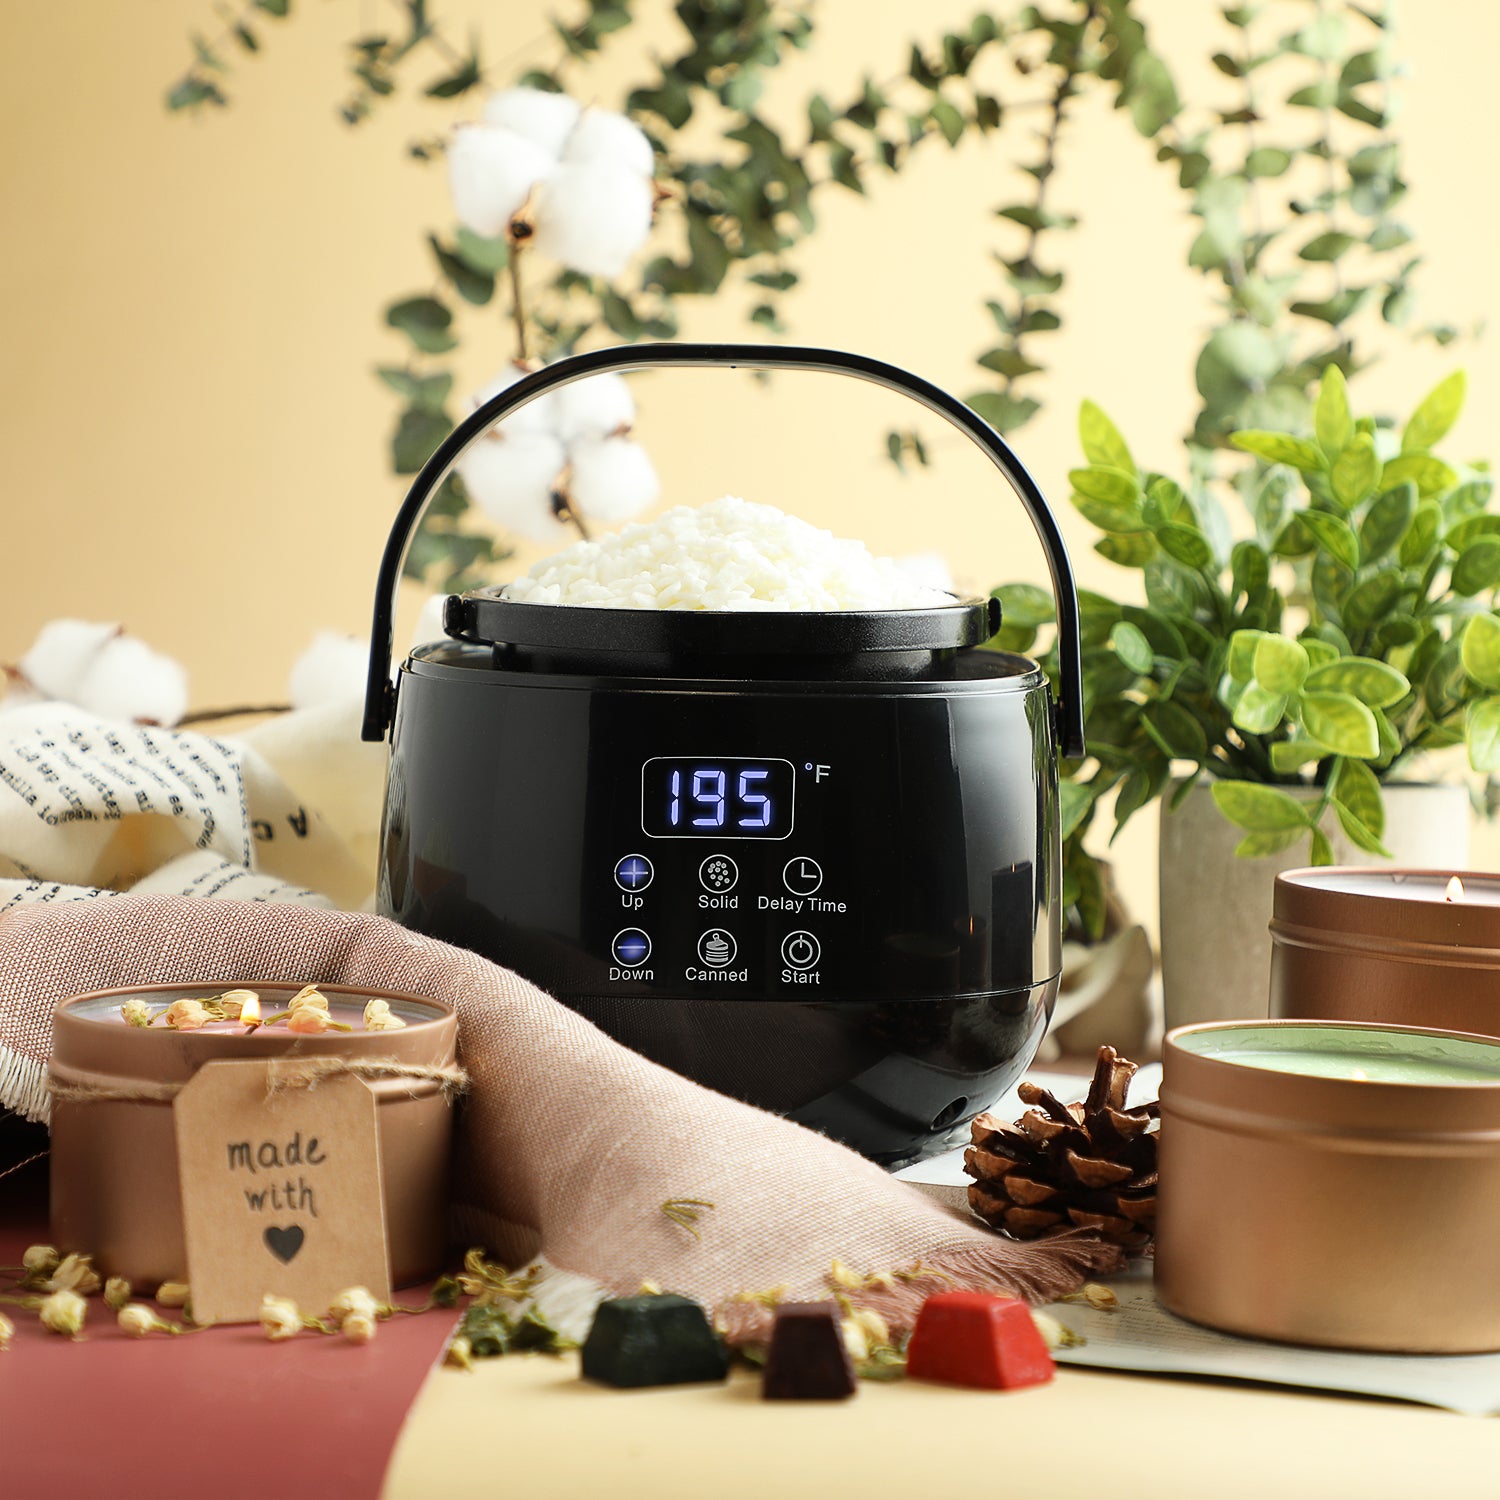 TOAUTO Soy Wax Electric Wax Melter for Candle Making Soap Melting Pot 1100W  110V